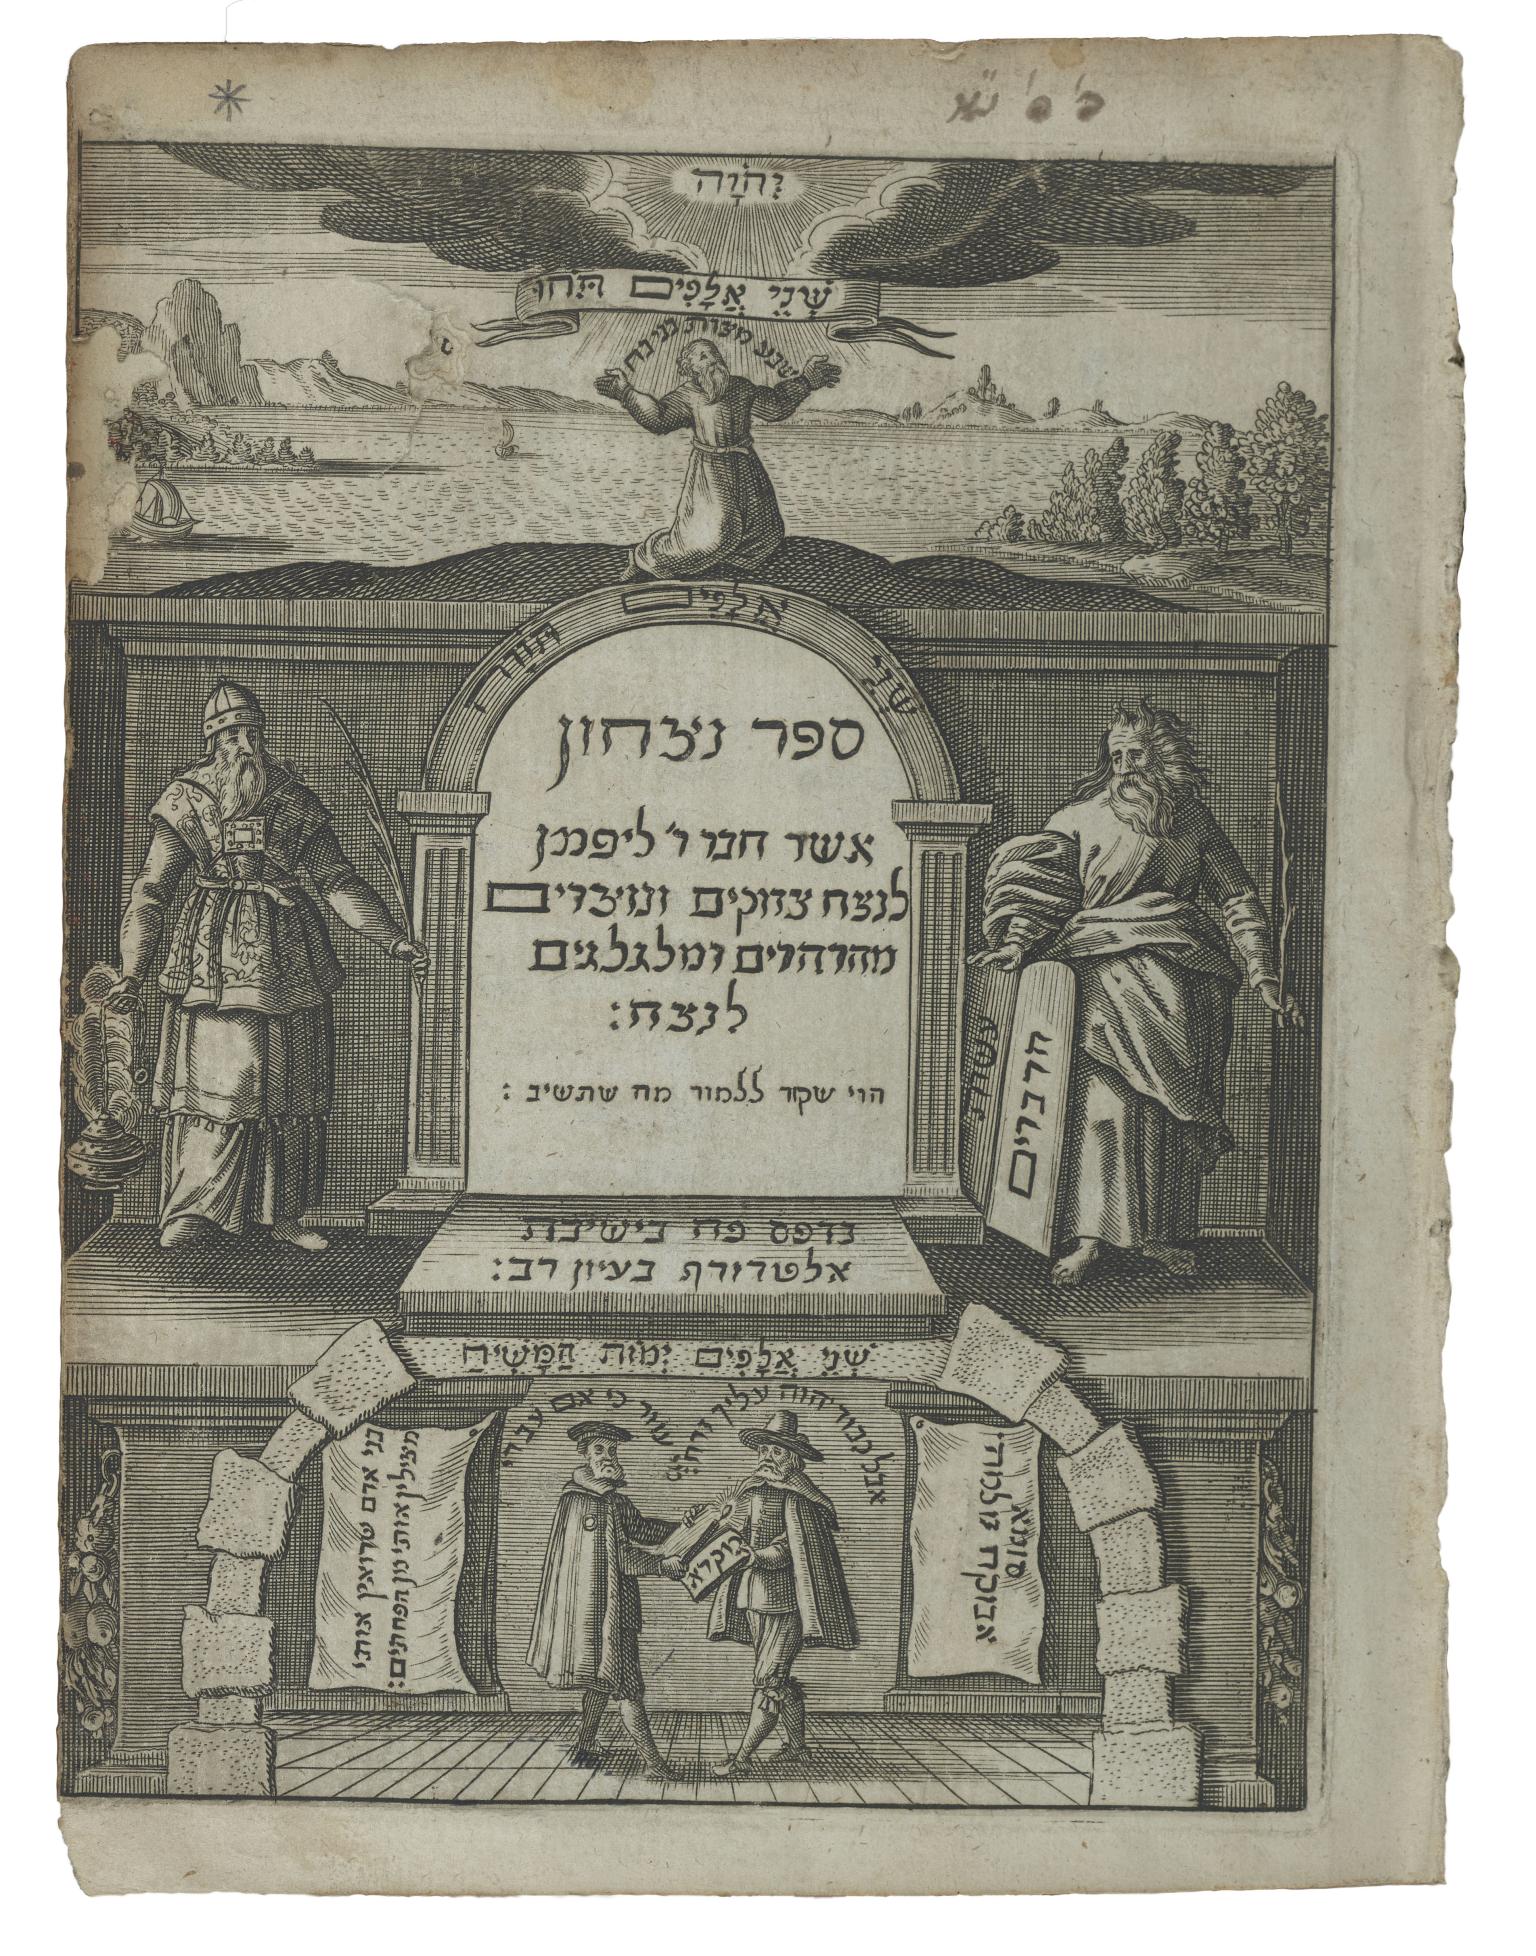 Printed page with Hebrew text in center under archway, flanked by two figures in robes, with a figure on top amid landscape background, and two figures below text under stone archway.